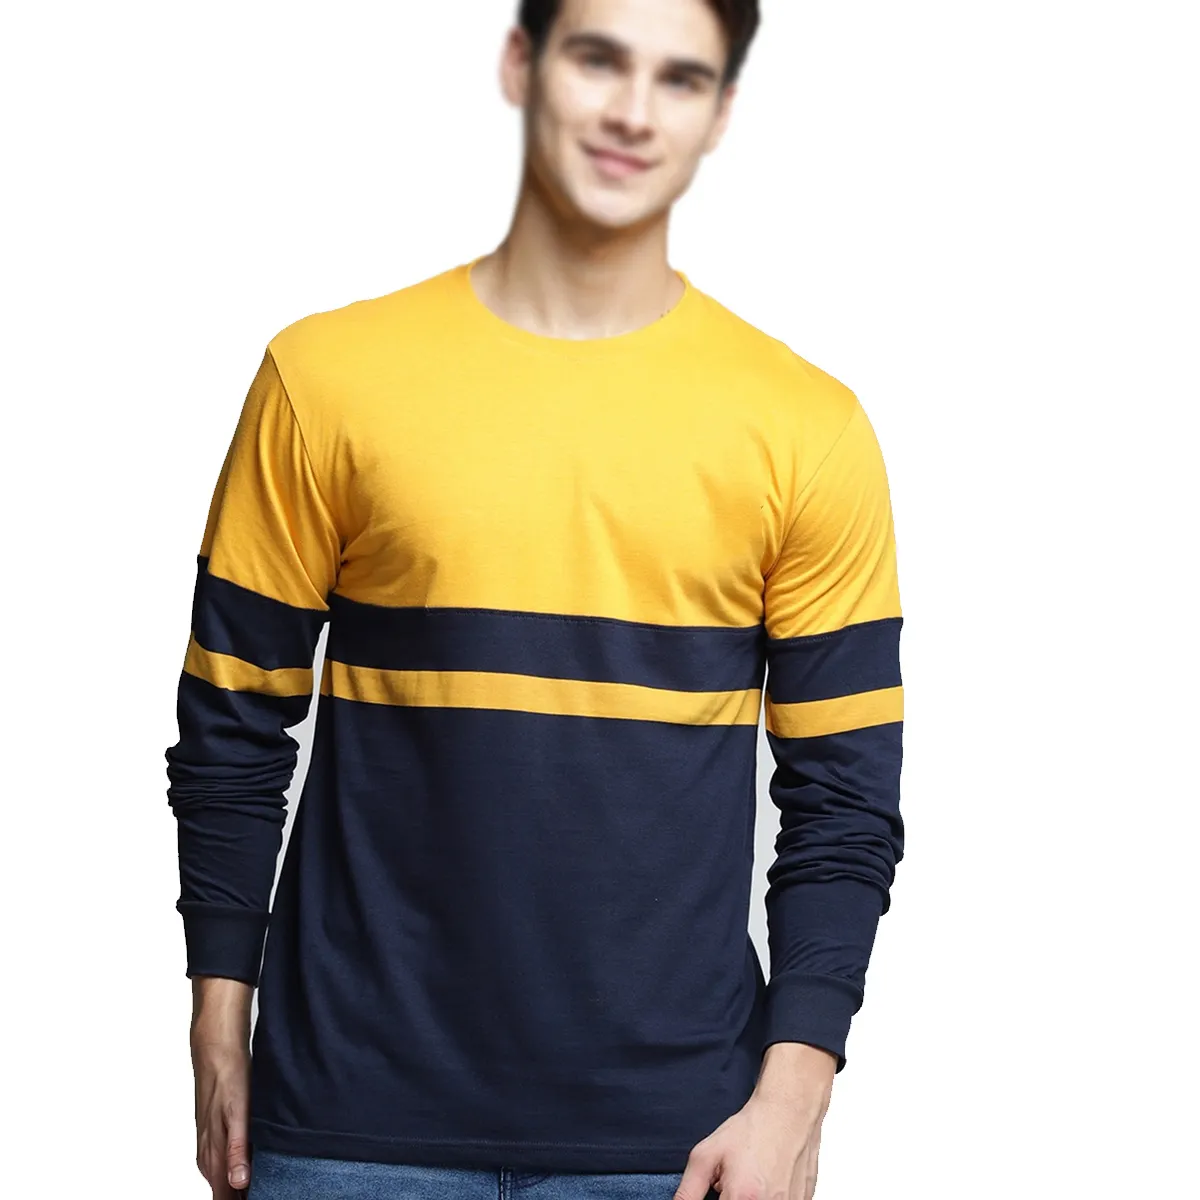 Mustard-Colored & Navy Blue Color Yellow Lined Round Neck 2022 Custom Made Full Sleeves T-shirt By XAPATA SPORTS